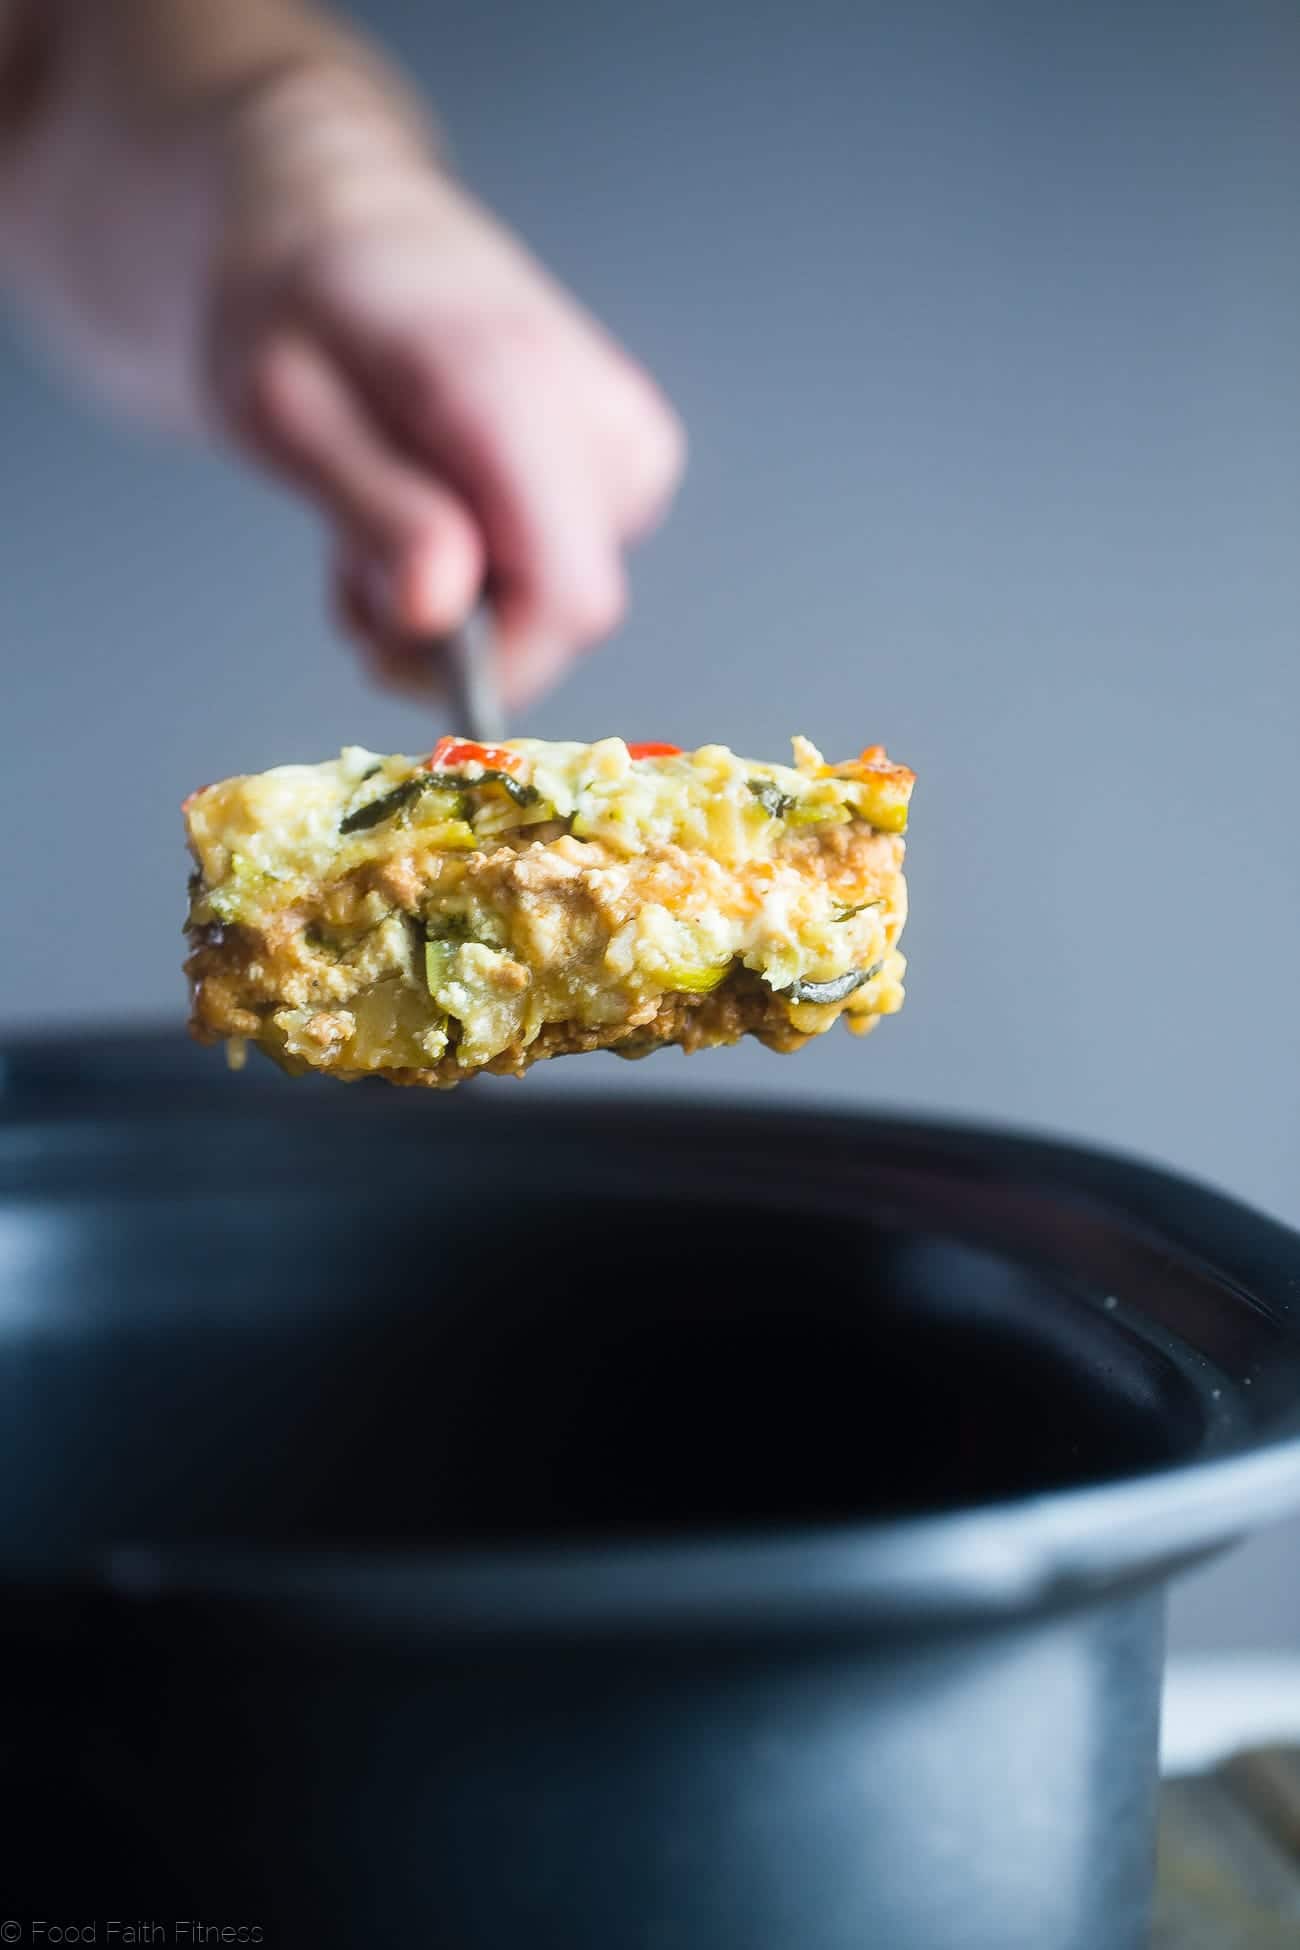 Thai Slow Cooker Zucchini Lasagna - This freezer-friendly zucchini lasagna is made in the slow cooker, and has a Thai peanut twist! It's a healthy, low carb and gluten free weeknight meal that the family will love! | Foodfaithfitness.com | @FoodFaithFit